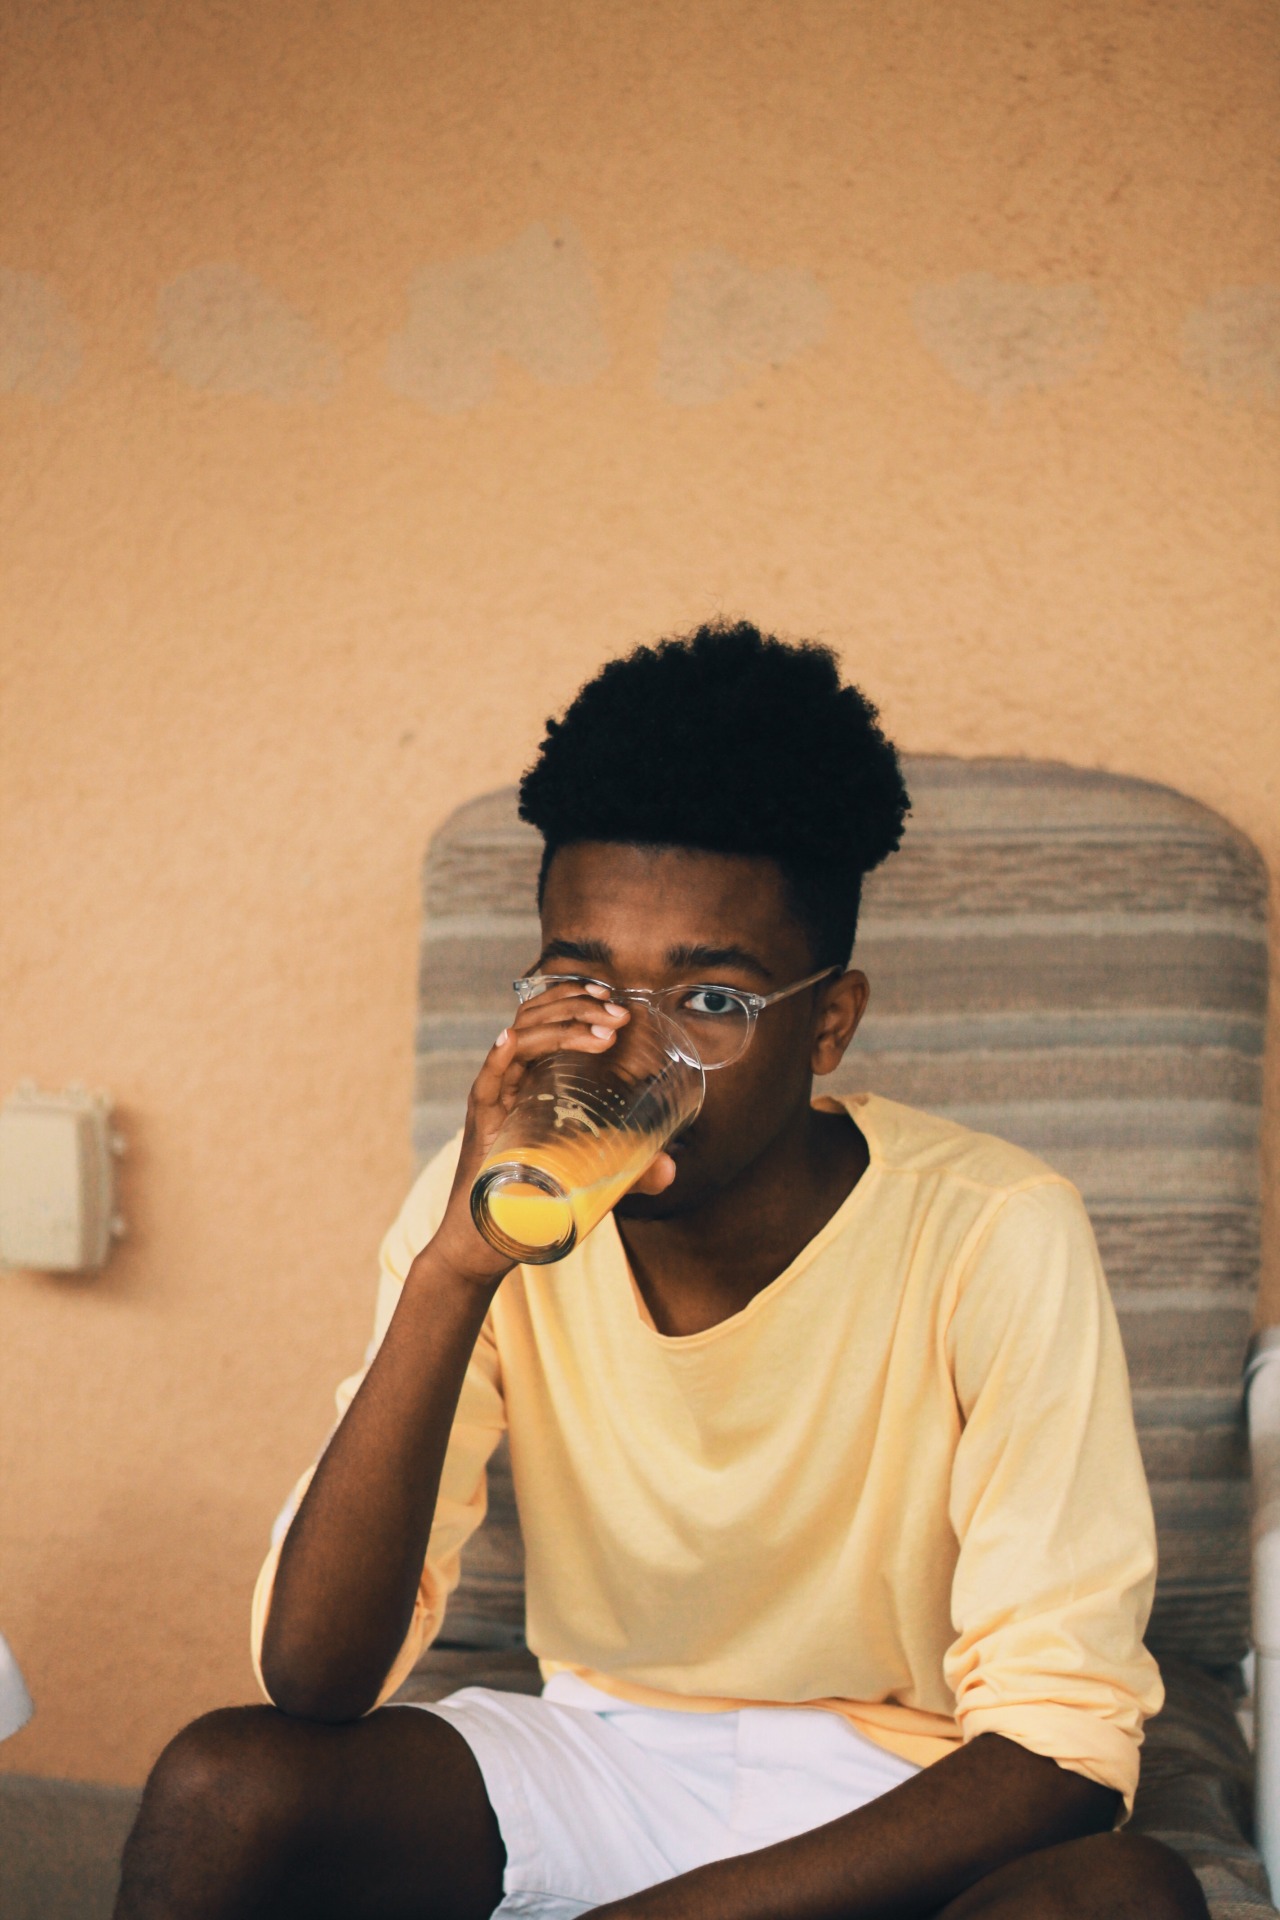 blkfraps: Poolside Portraits - Myles Loftin  This is a series of candid/posed portraits